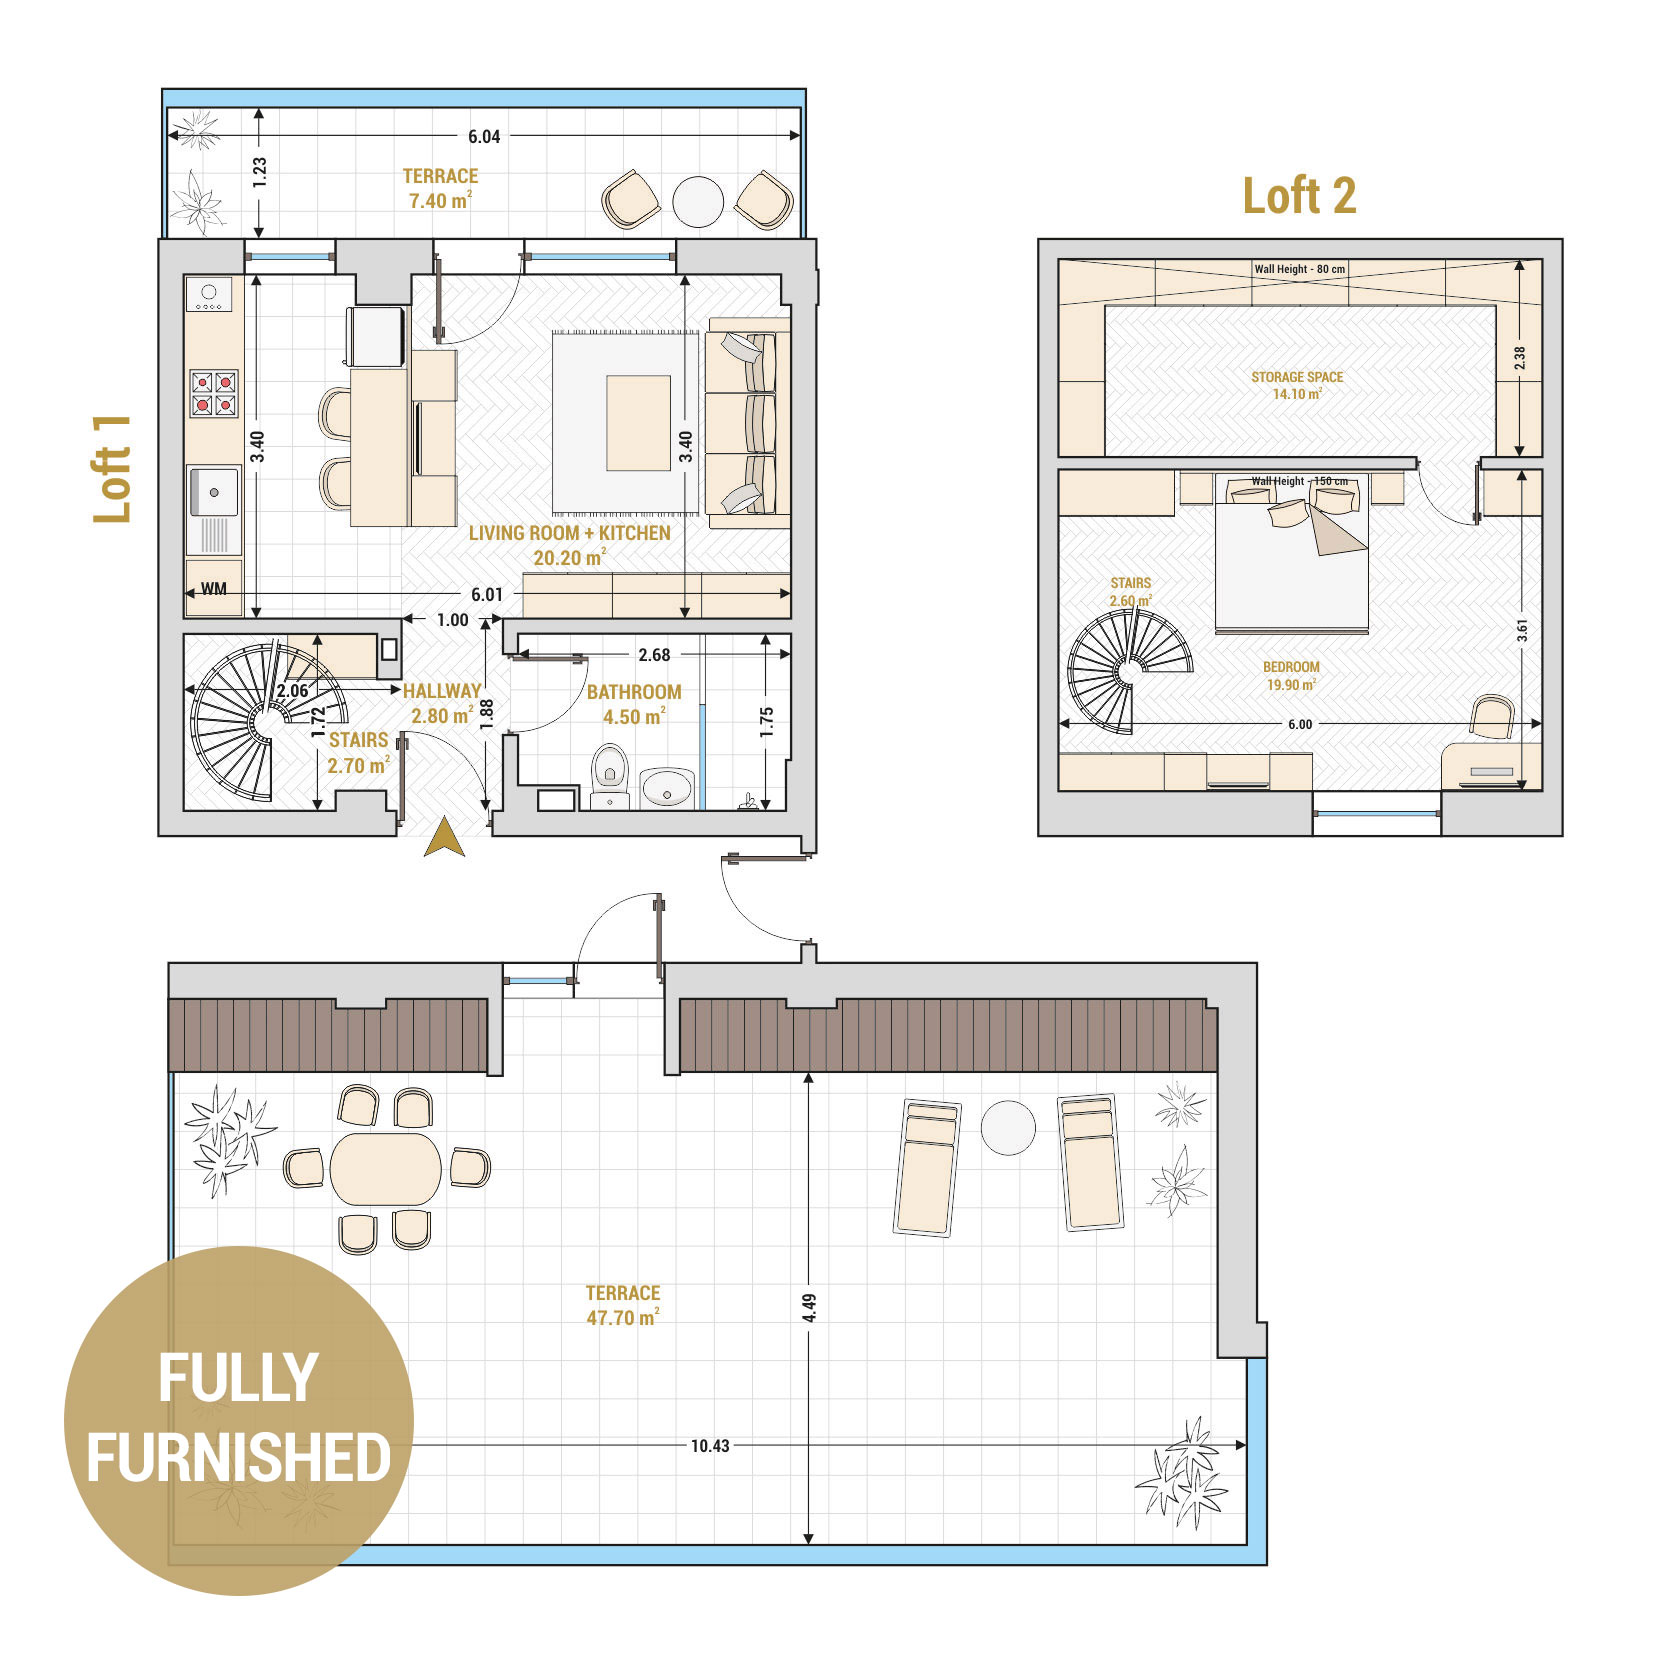 Catedral Residence - 2 Room Duplex Apartments for Sale - Bucharest - 2 Room Duplex Apartment Nr. 36 – Total Useful Area 121.90 square meters